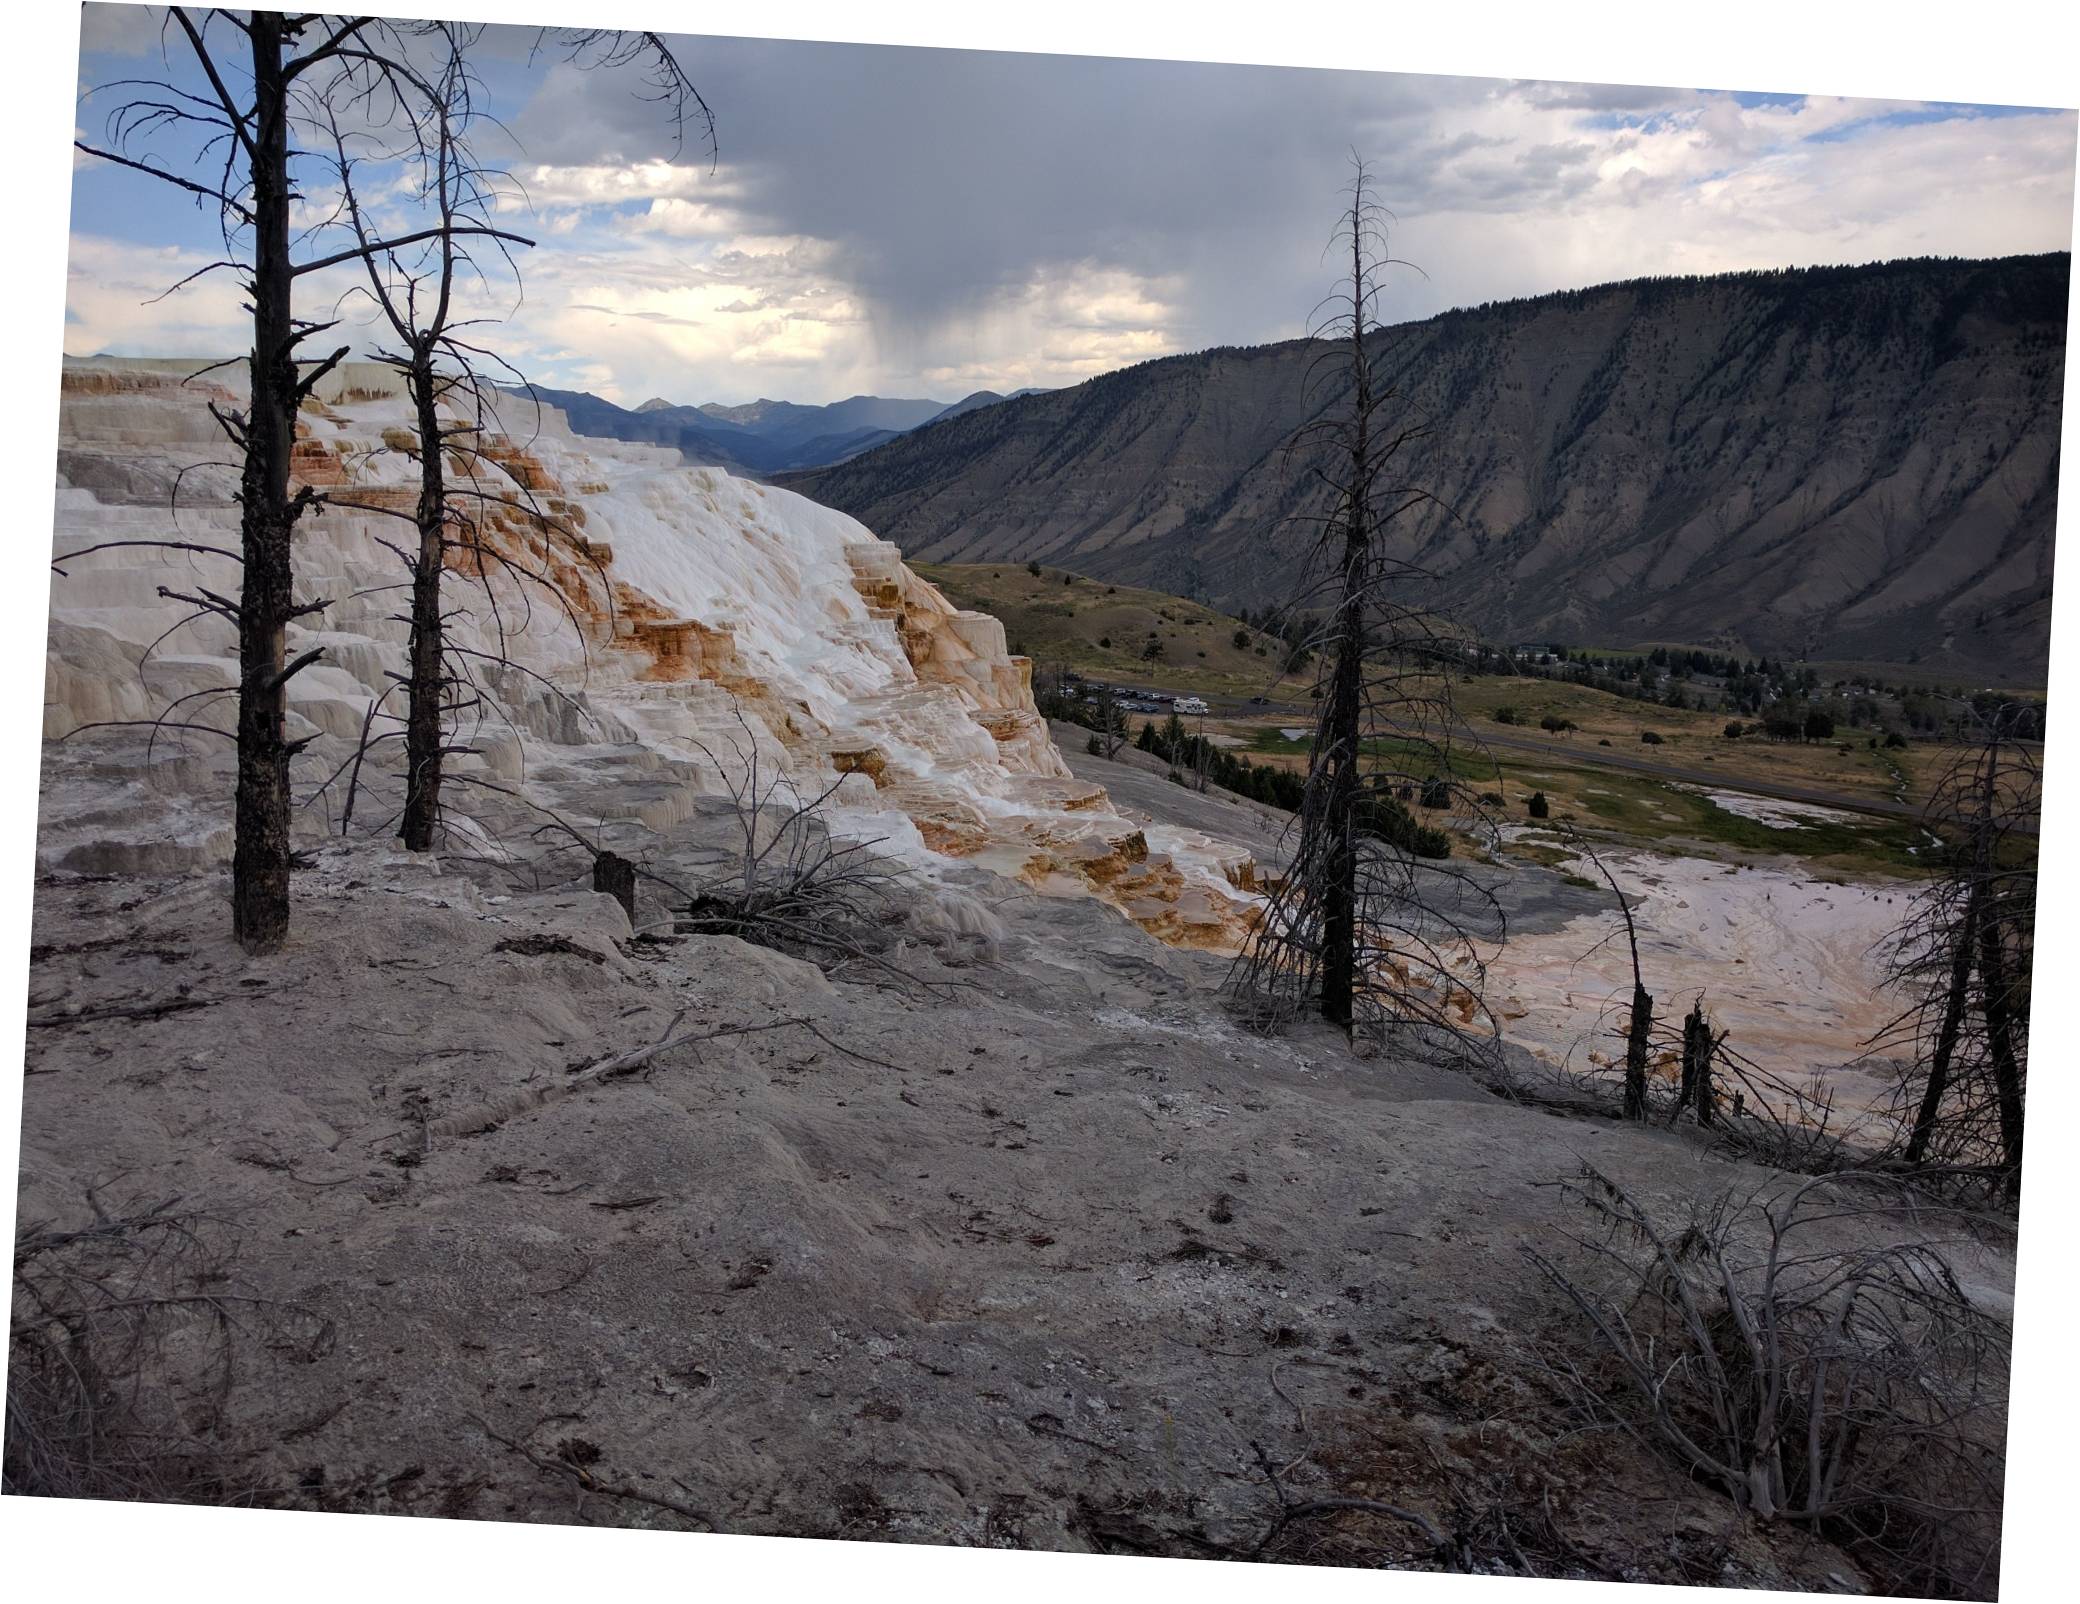 Image: The travertine terraces of the Mammoth Hot Springs